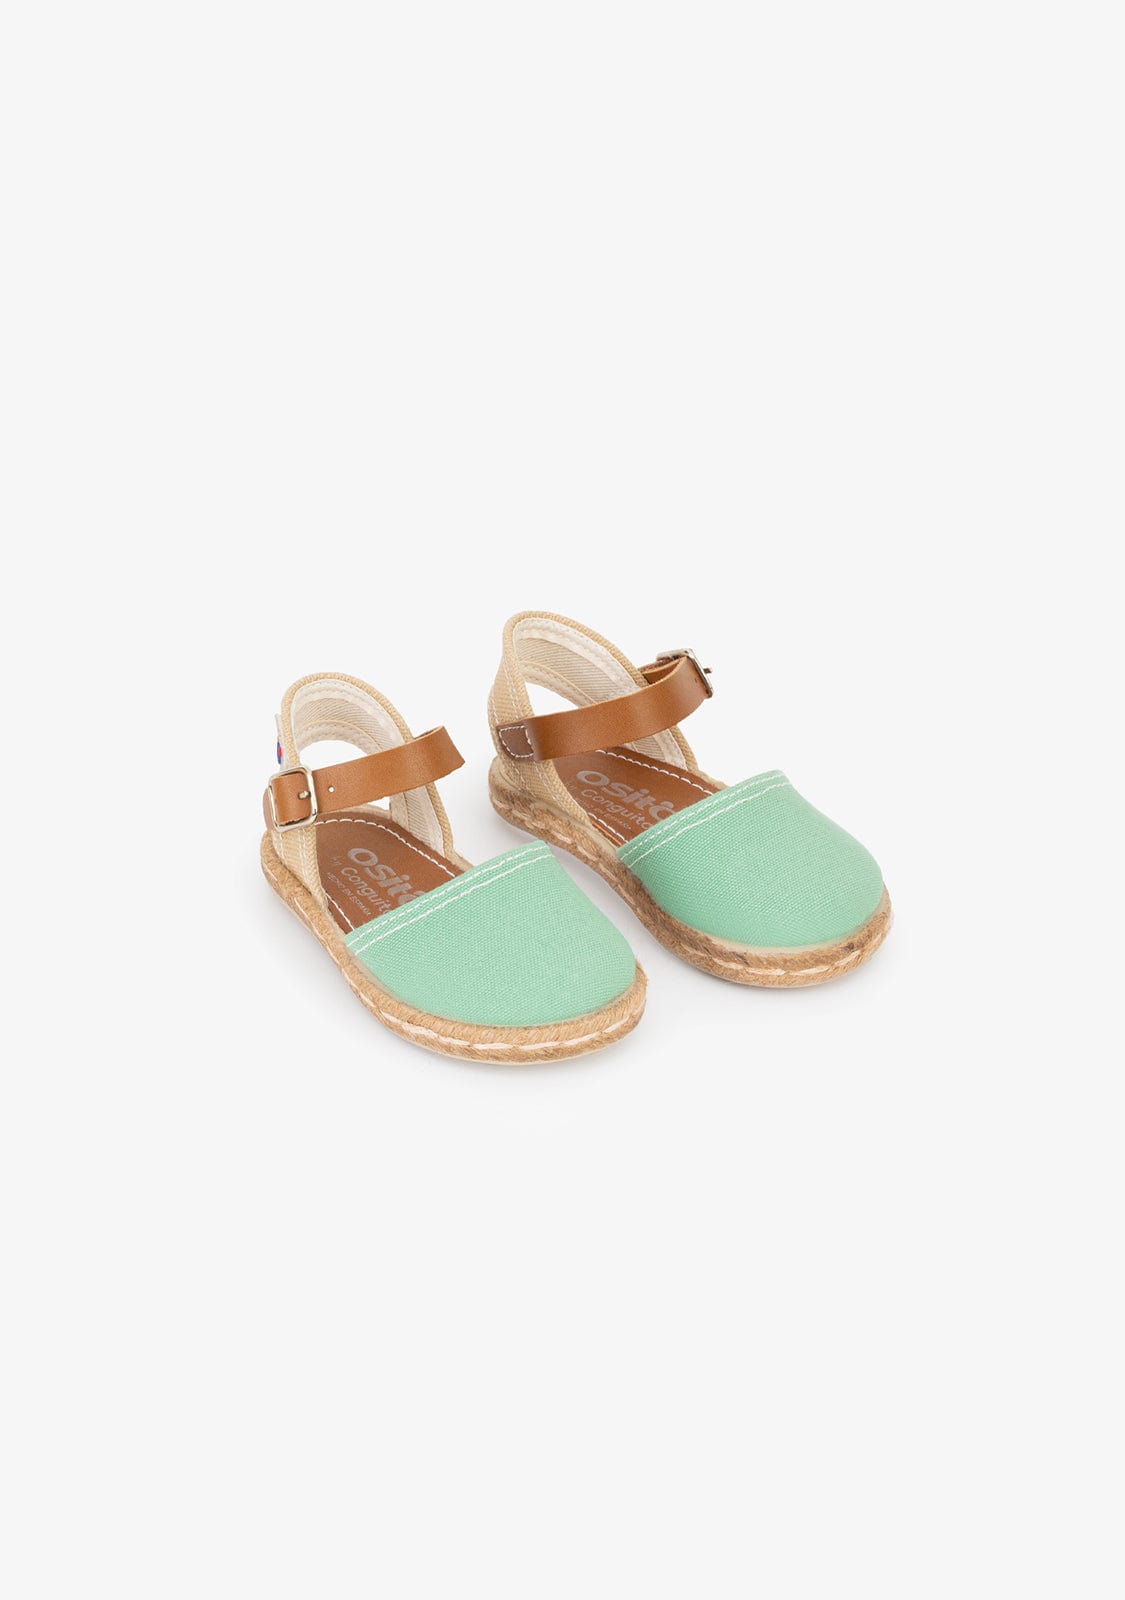 OSITO Shoes Baby's Brasil Espadrilles